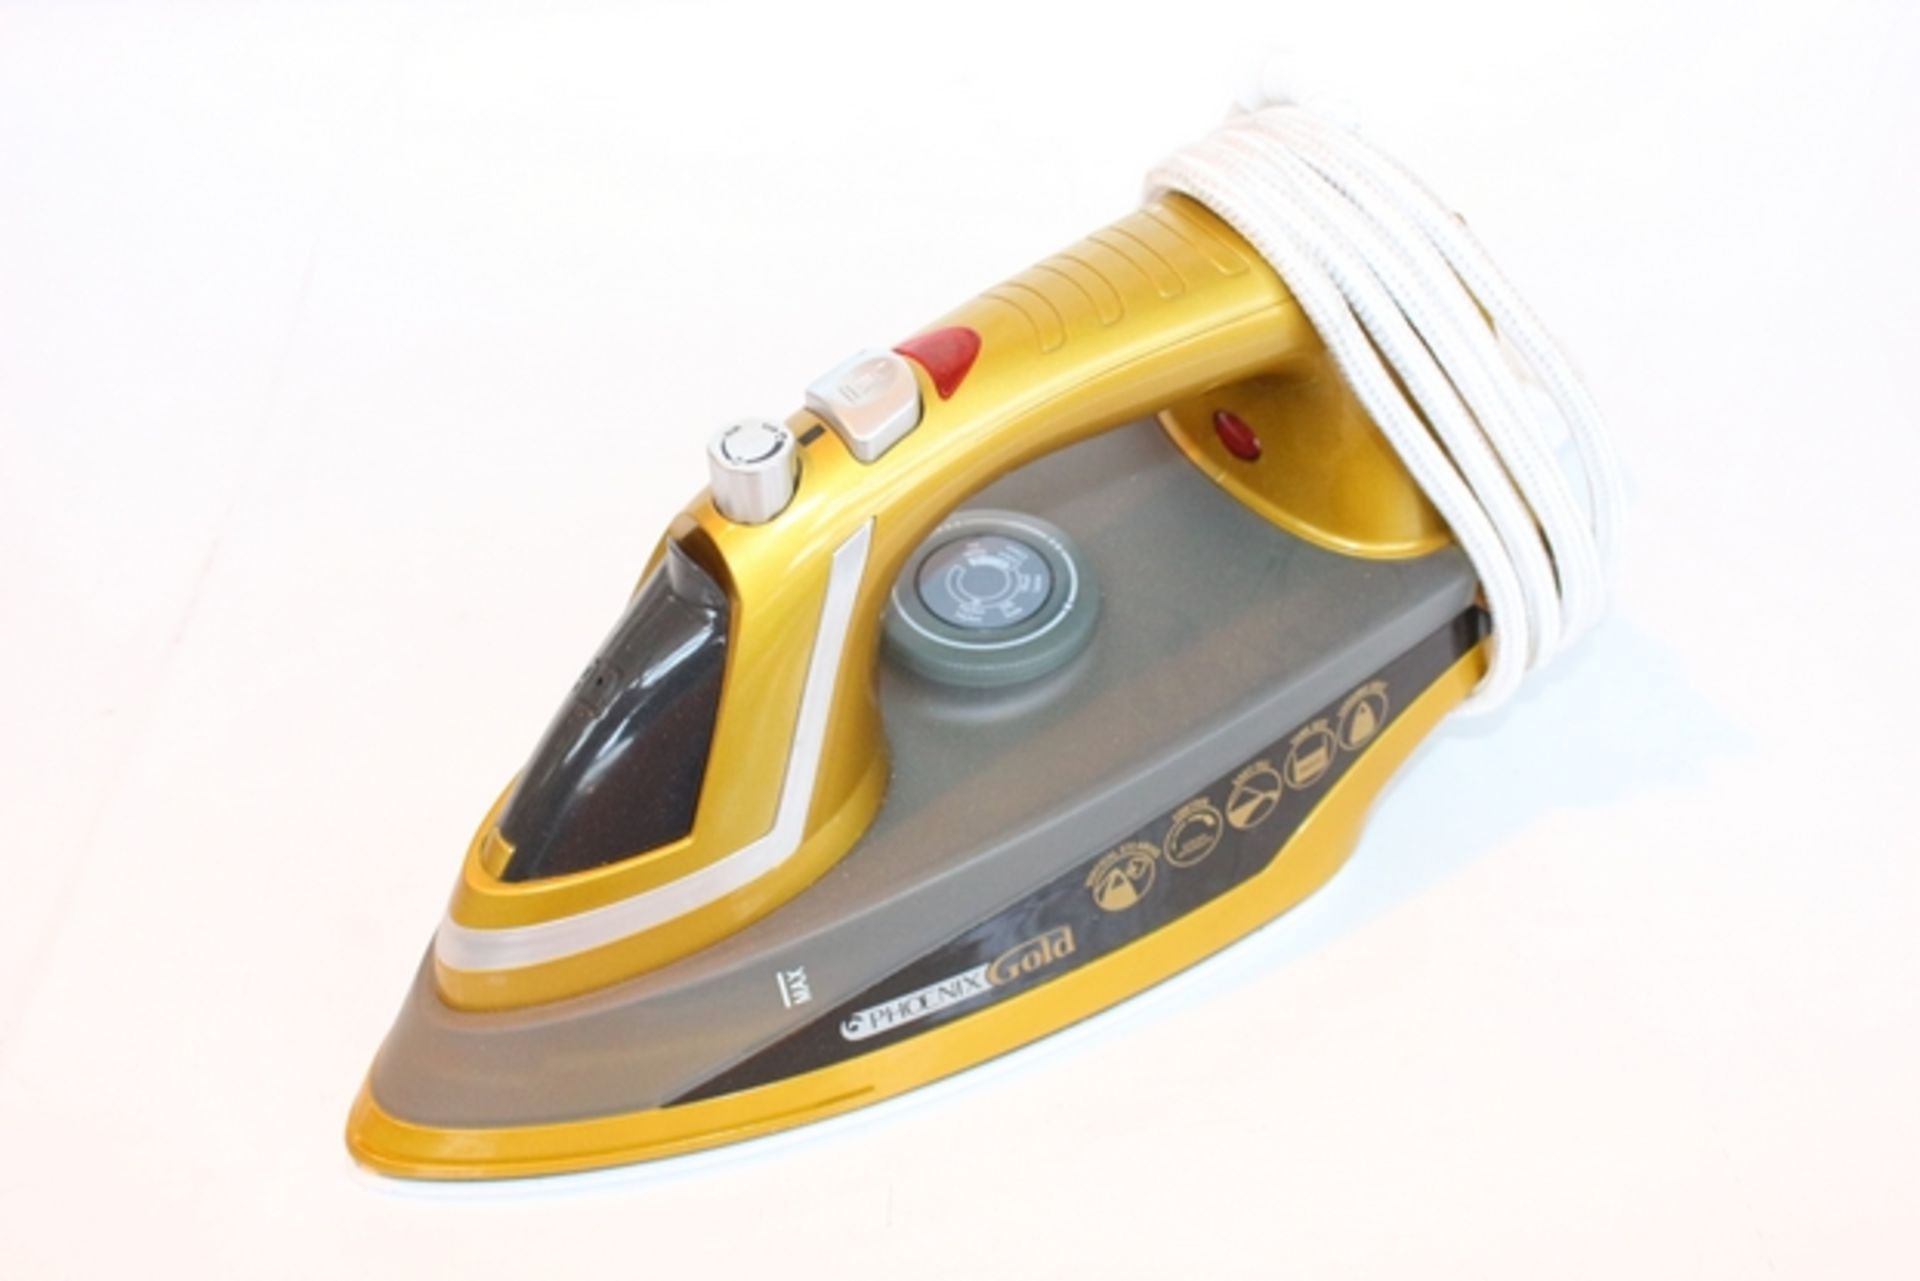 3 x PHOENIX GOLD VERTICAL STEAMING IRONS *PLEASE NOTE THAT THE BID PRICE IS MULTIPLIED BY THE NUMBER